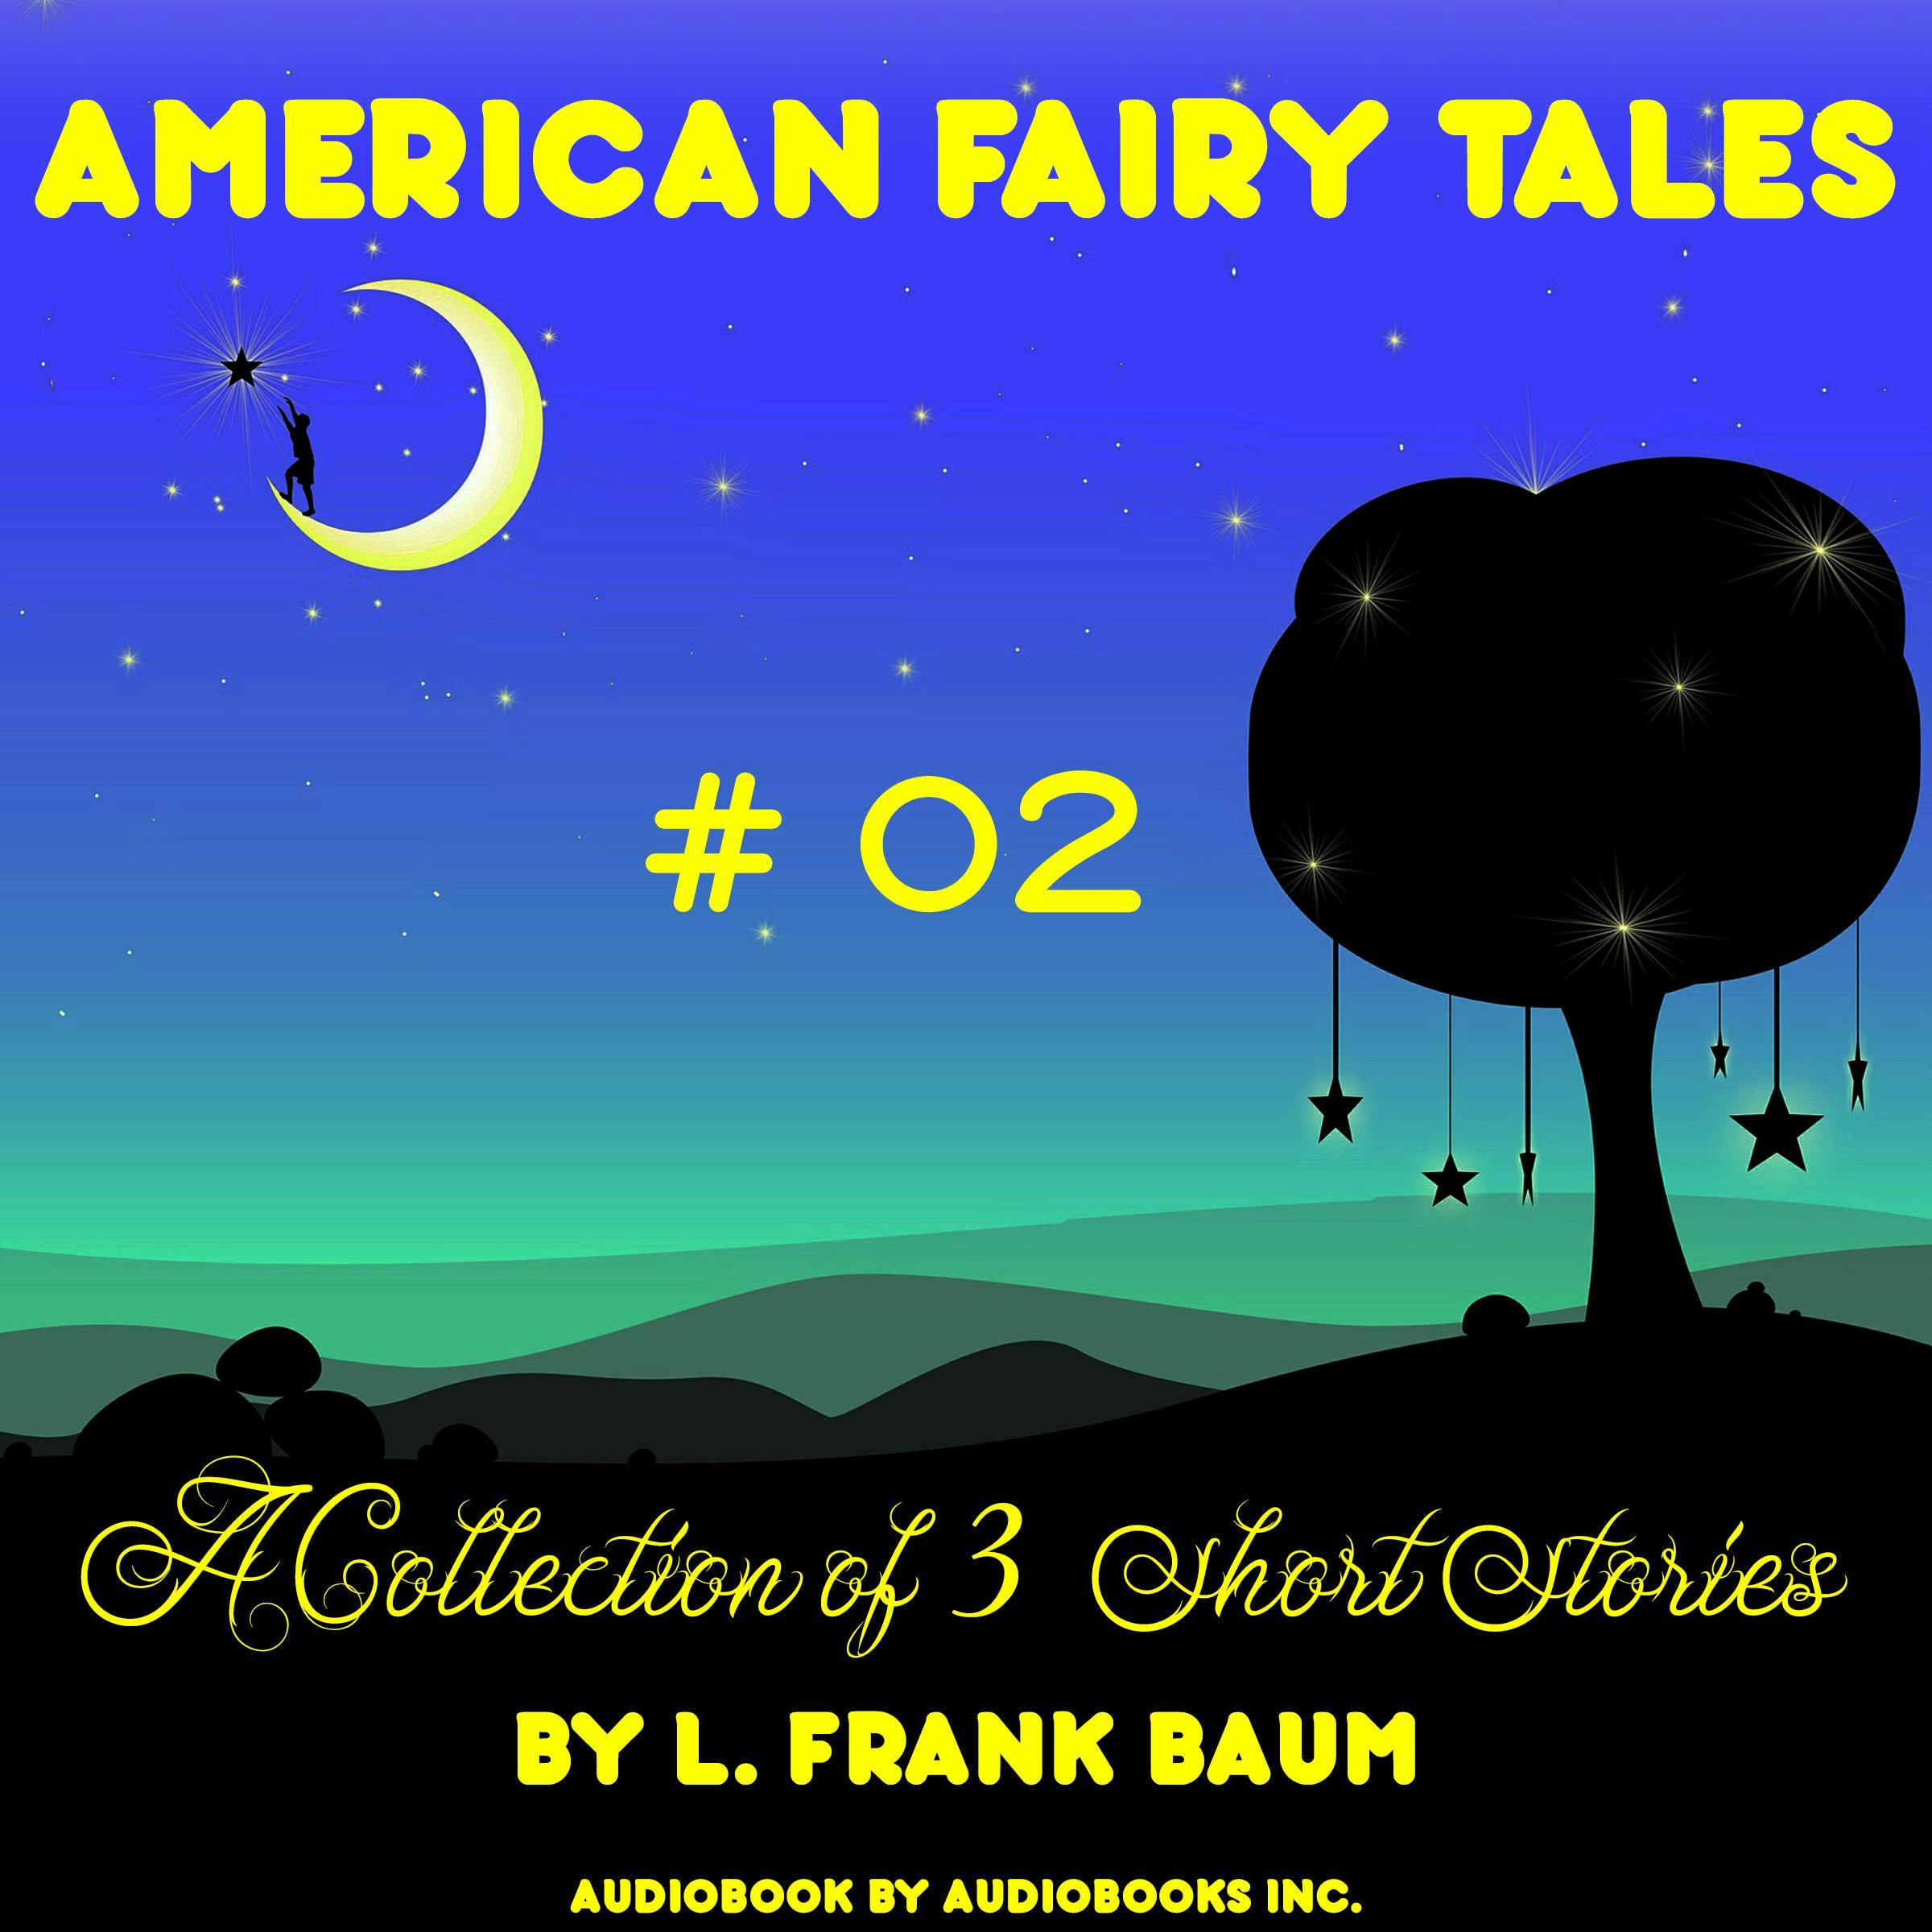 American Fairy Tales, A Collection of 3 Short Stories, # 02 - undefined